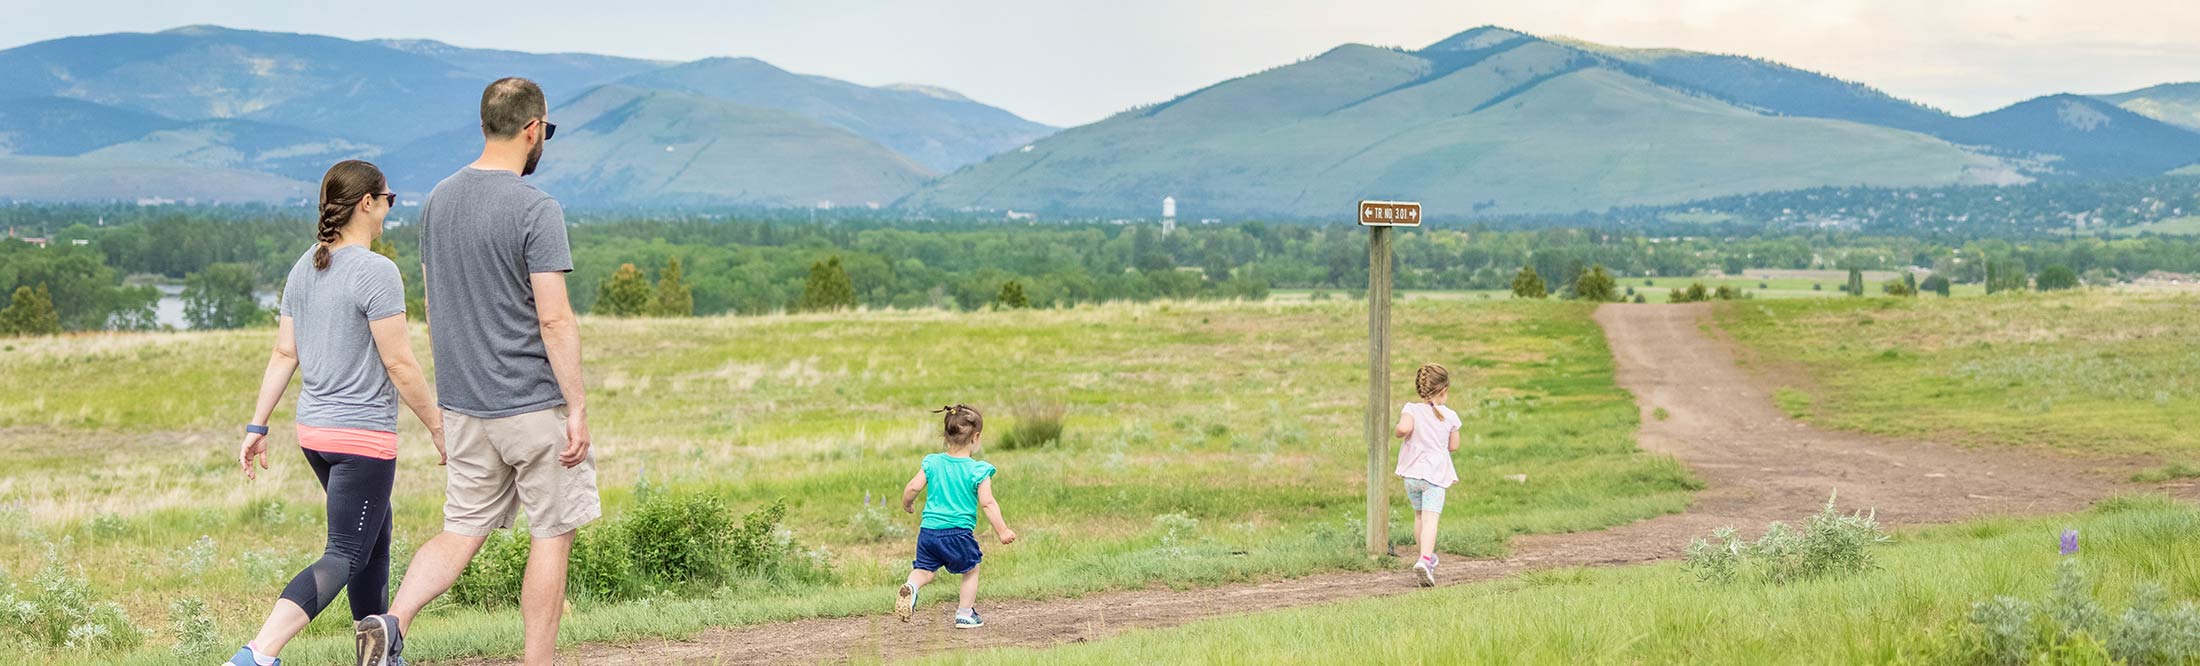 10 Missoula-Inspired Mother's Day Gift Ideas